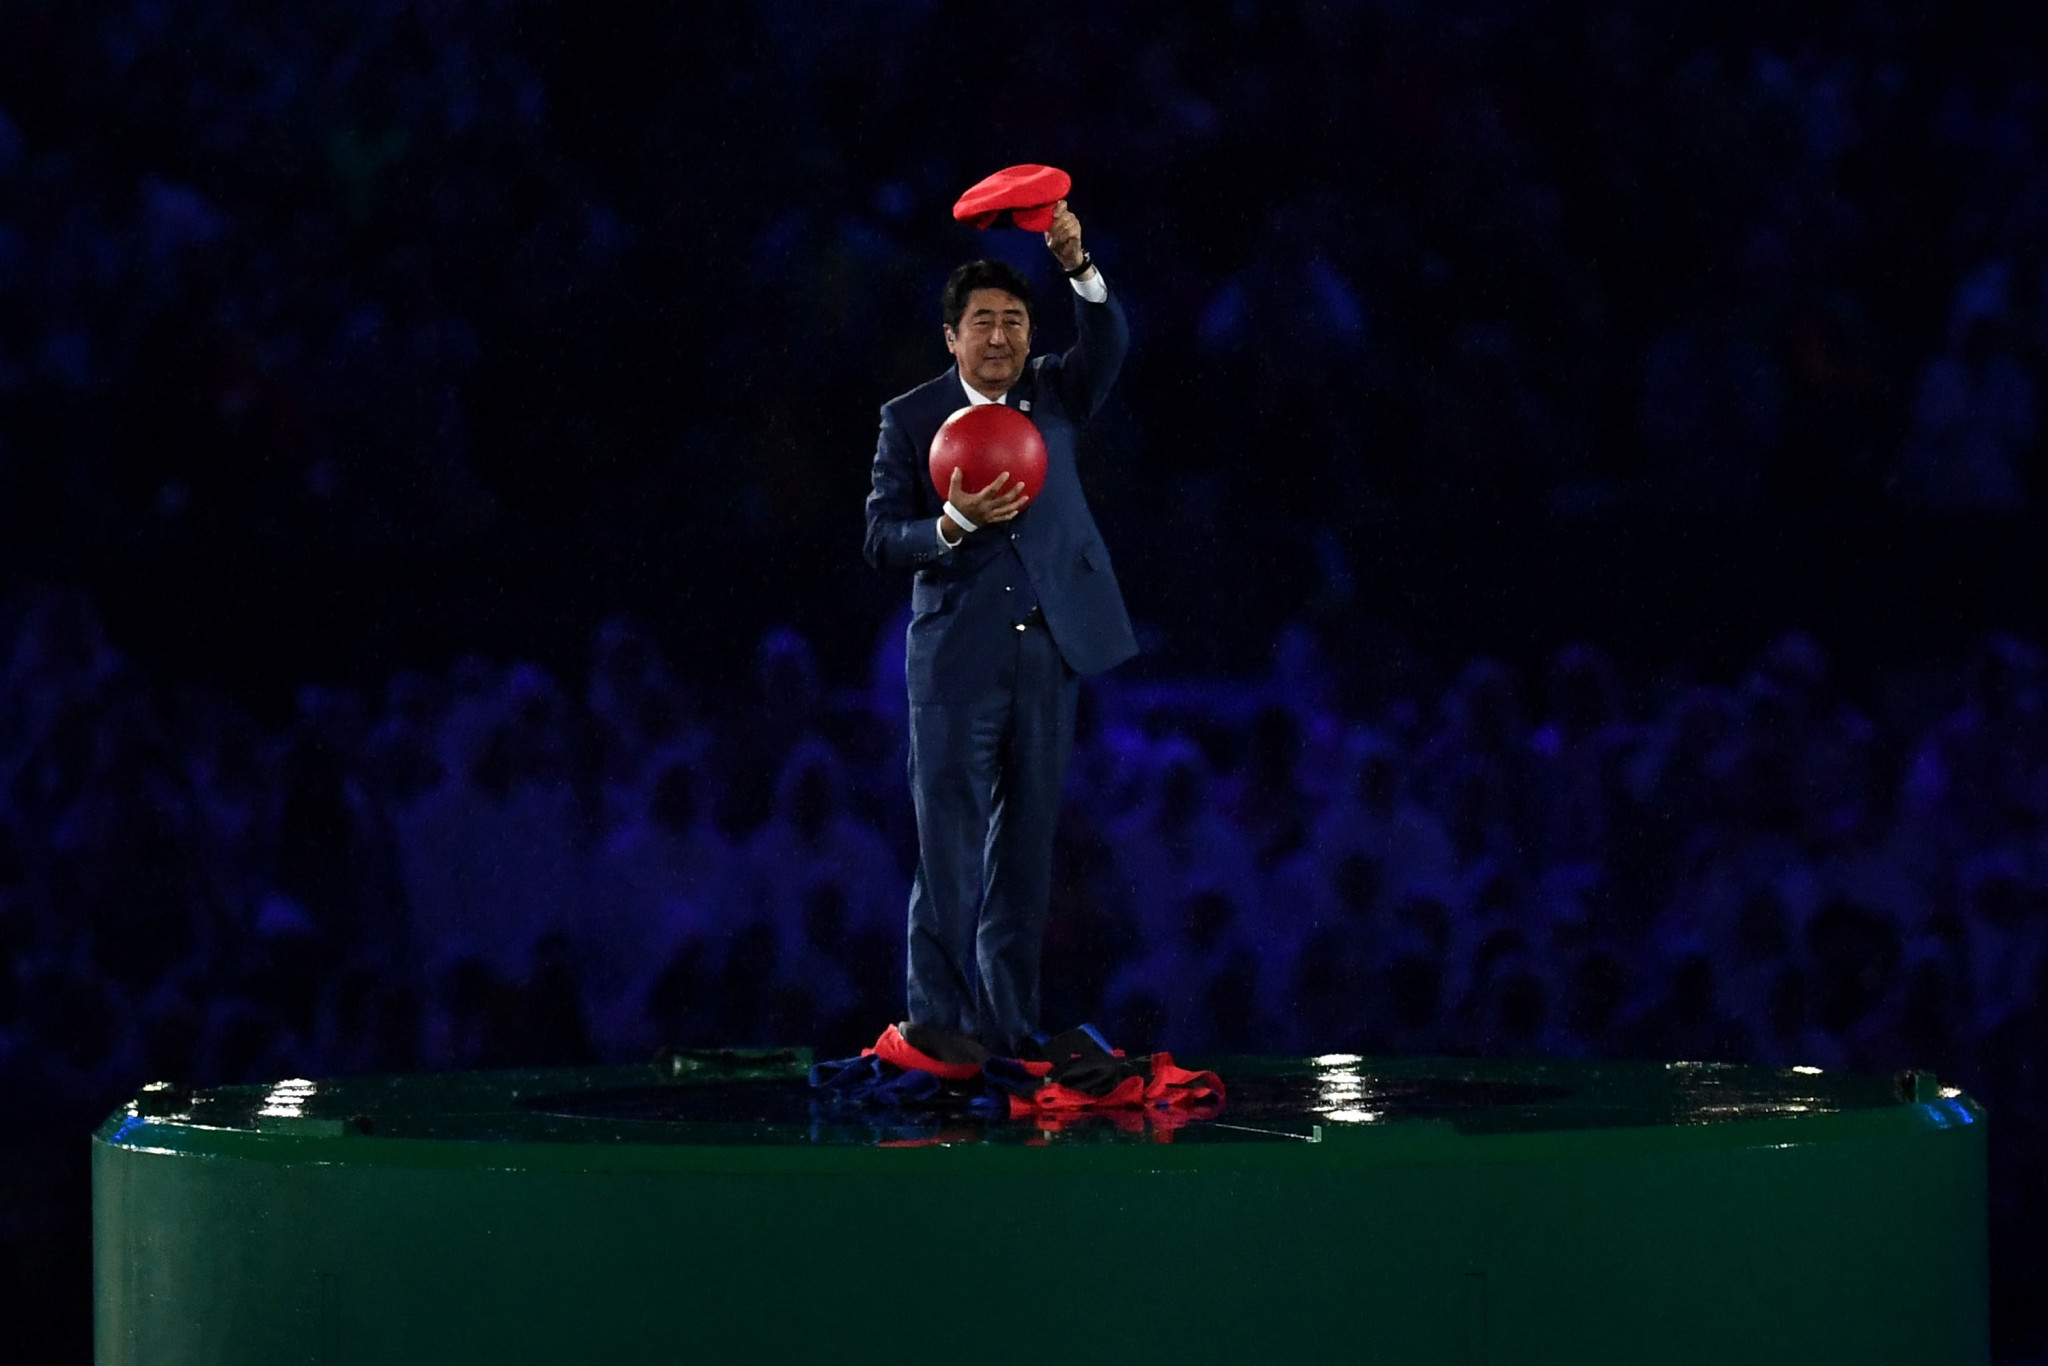 Shinzō Abe played a prominent role at the Rio 2016 Closing Ceremony ©Getty Images